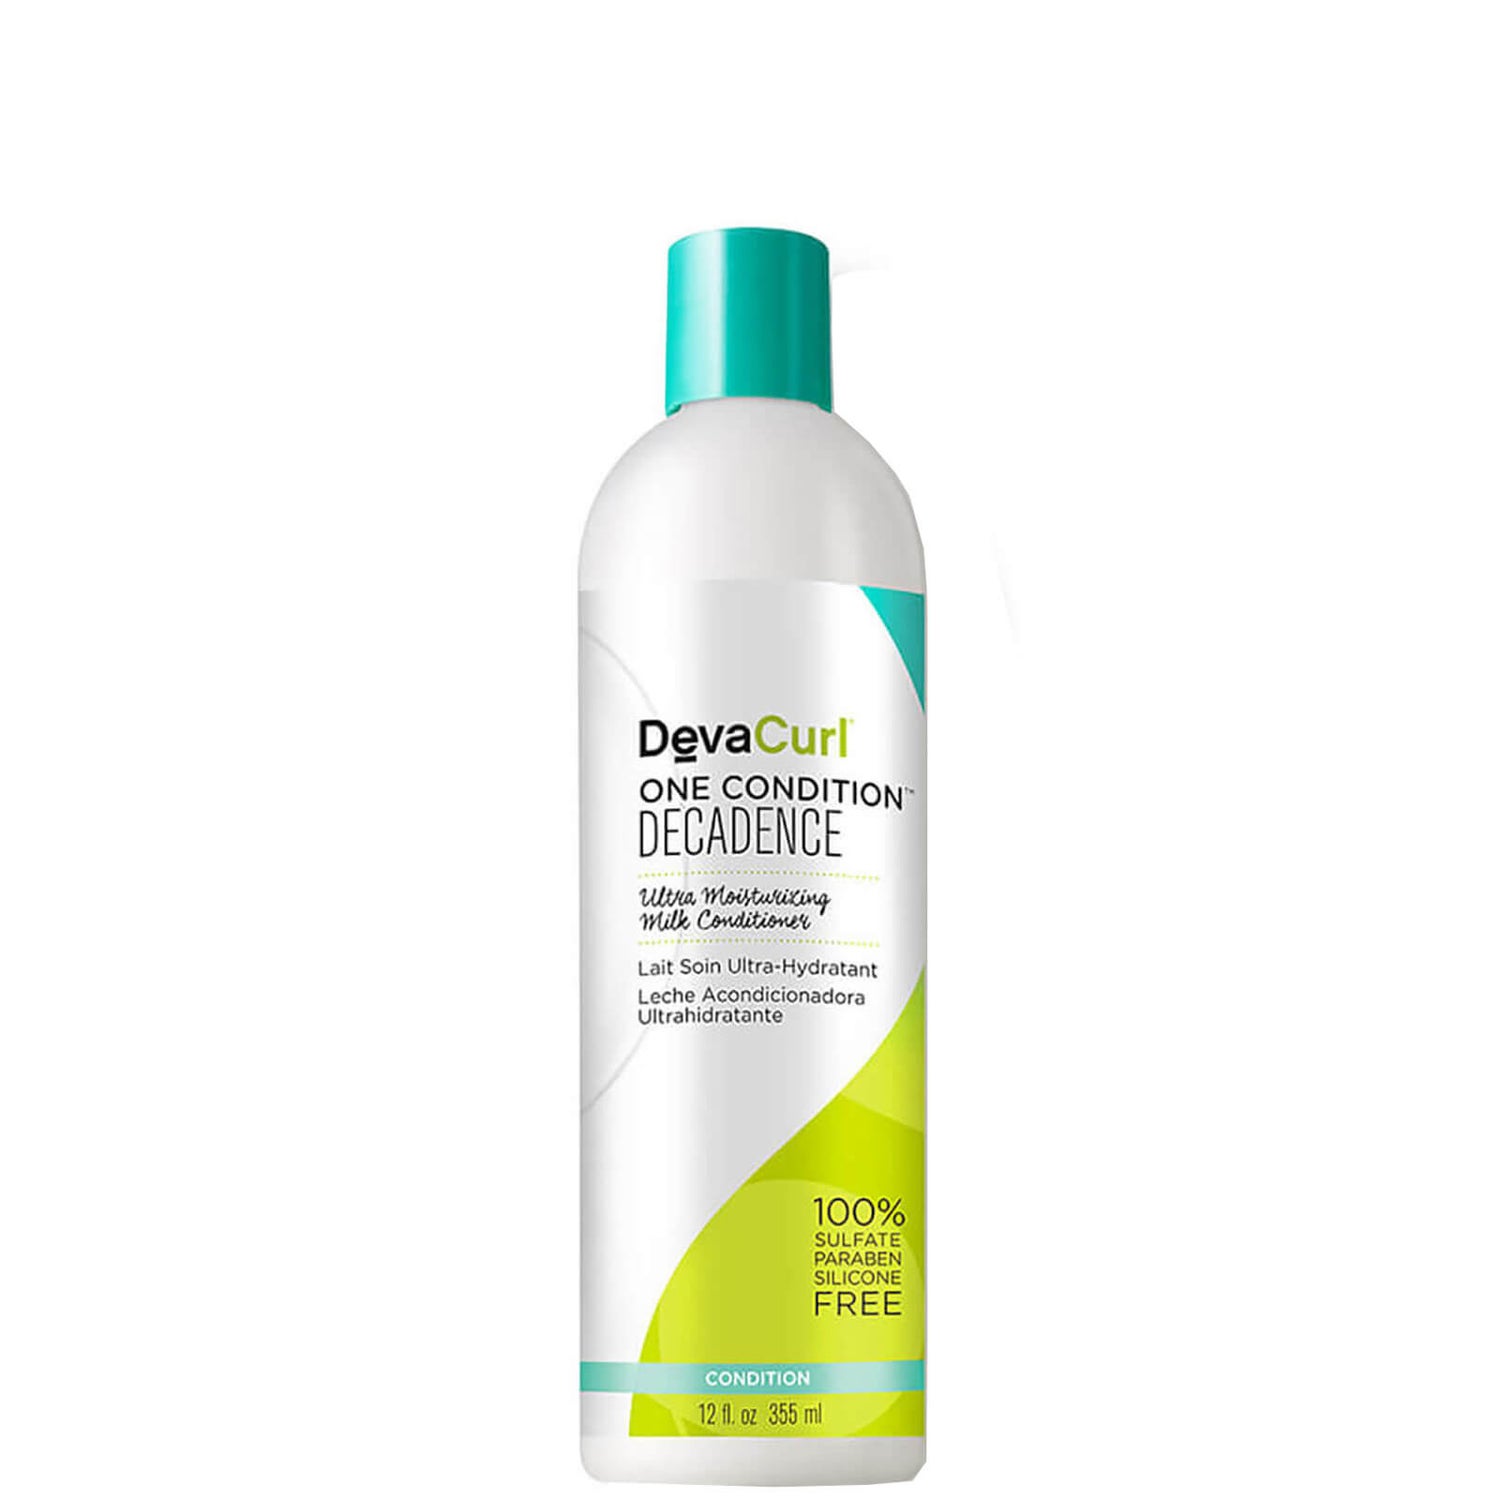 DevaCurl One Condition Decadence for Super Curly Hair (12 oz.)